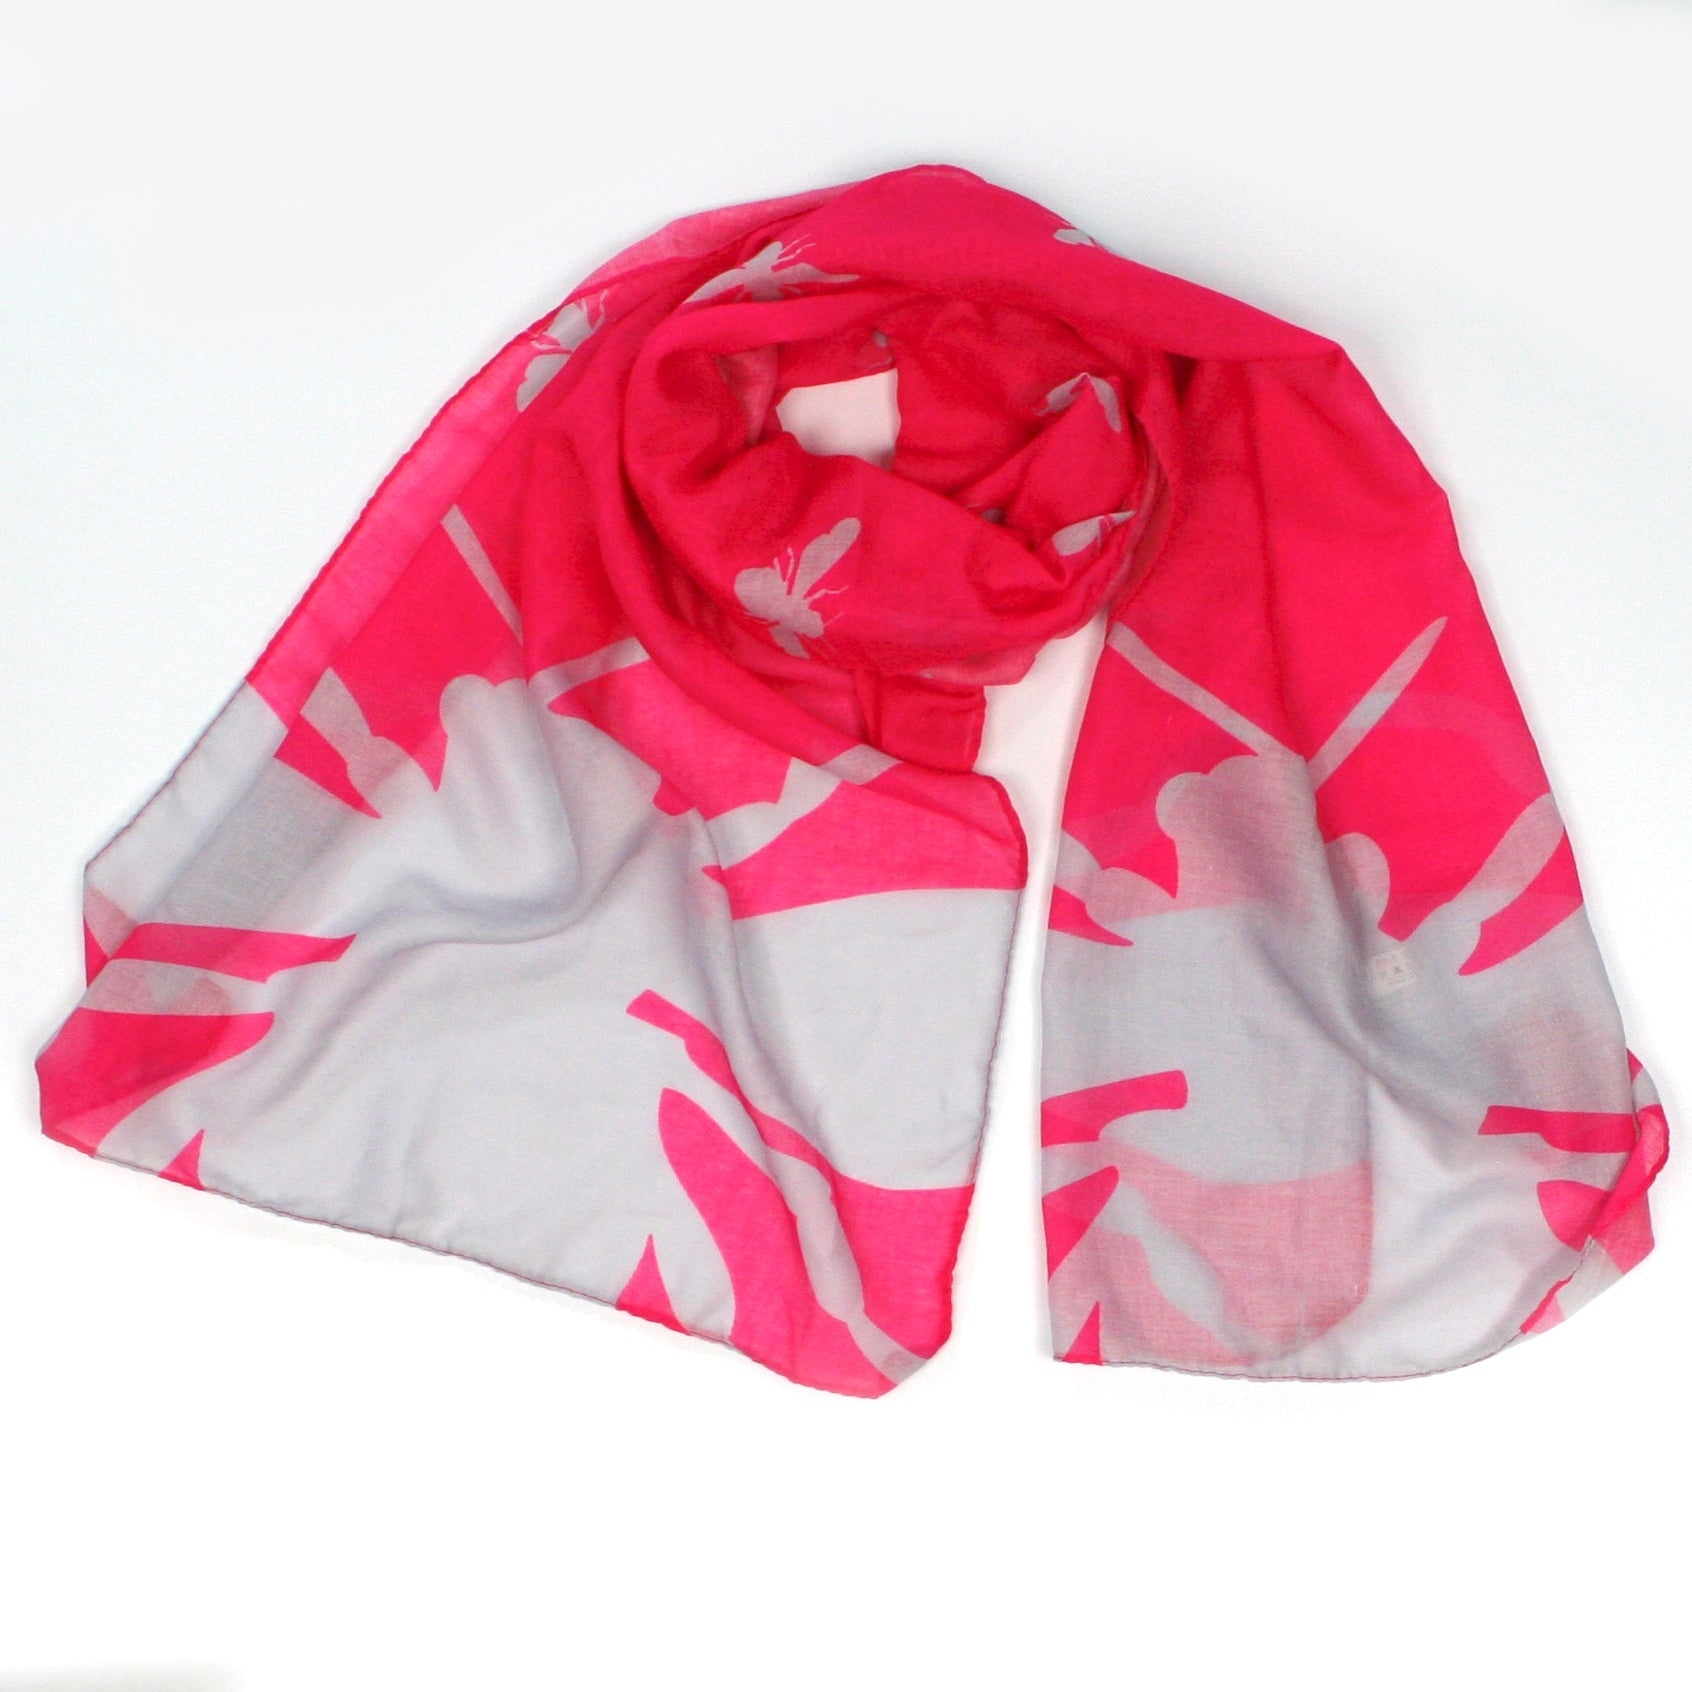 Limited Edition Bumble Bee Scarf Pink – Stylish & Luxurious – Unisex – The Scarf Giraffe